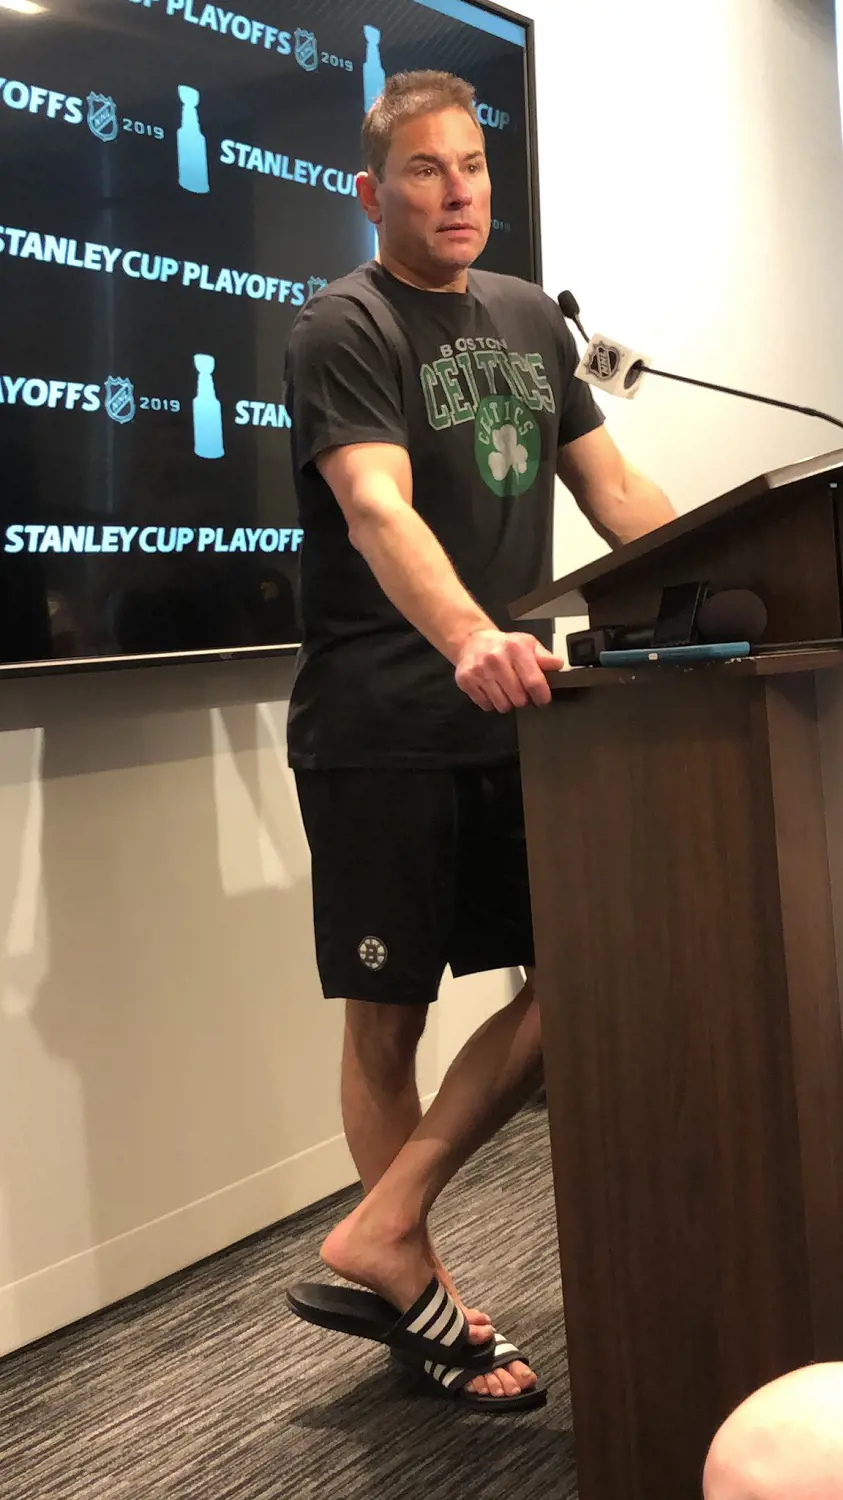 Cassidy in press meet wearing T-shirt of Boston Celtics, an Eastern Conference Basketball team in NBA